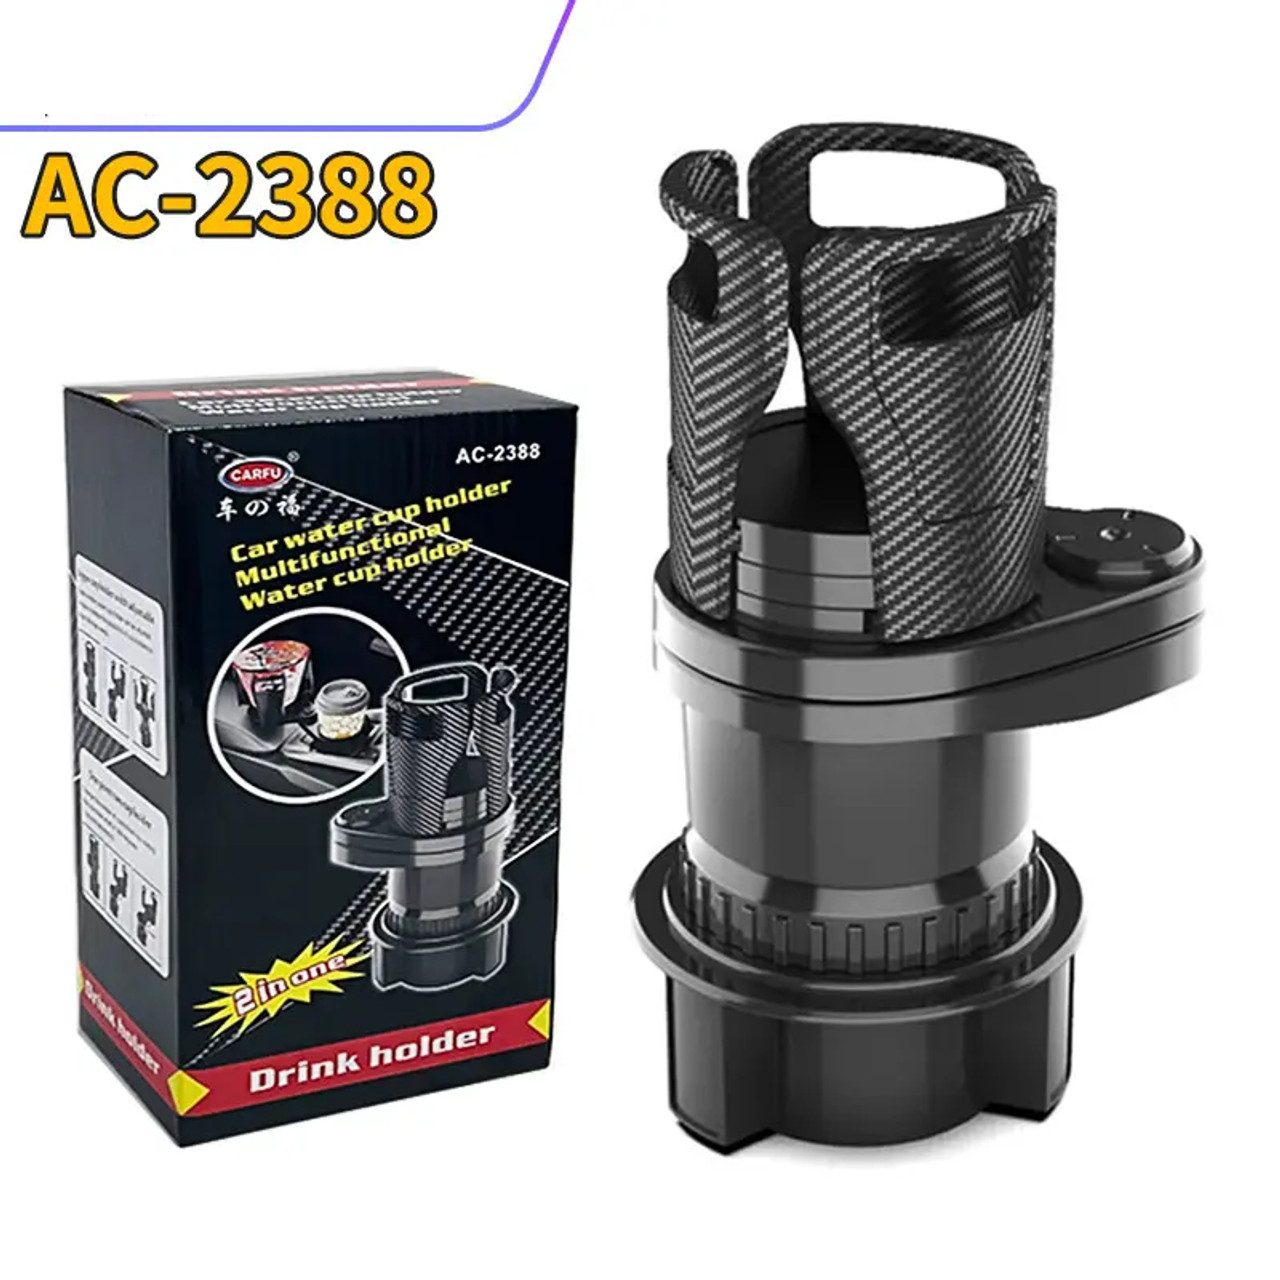 Multifunctional Cup Holder Expander 2 in 1 All Purpose Car Cup Holder and  Organizer With Adjustable Base For Water Bottle